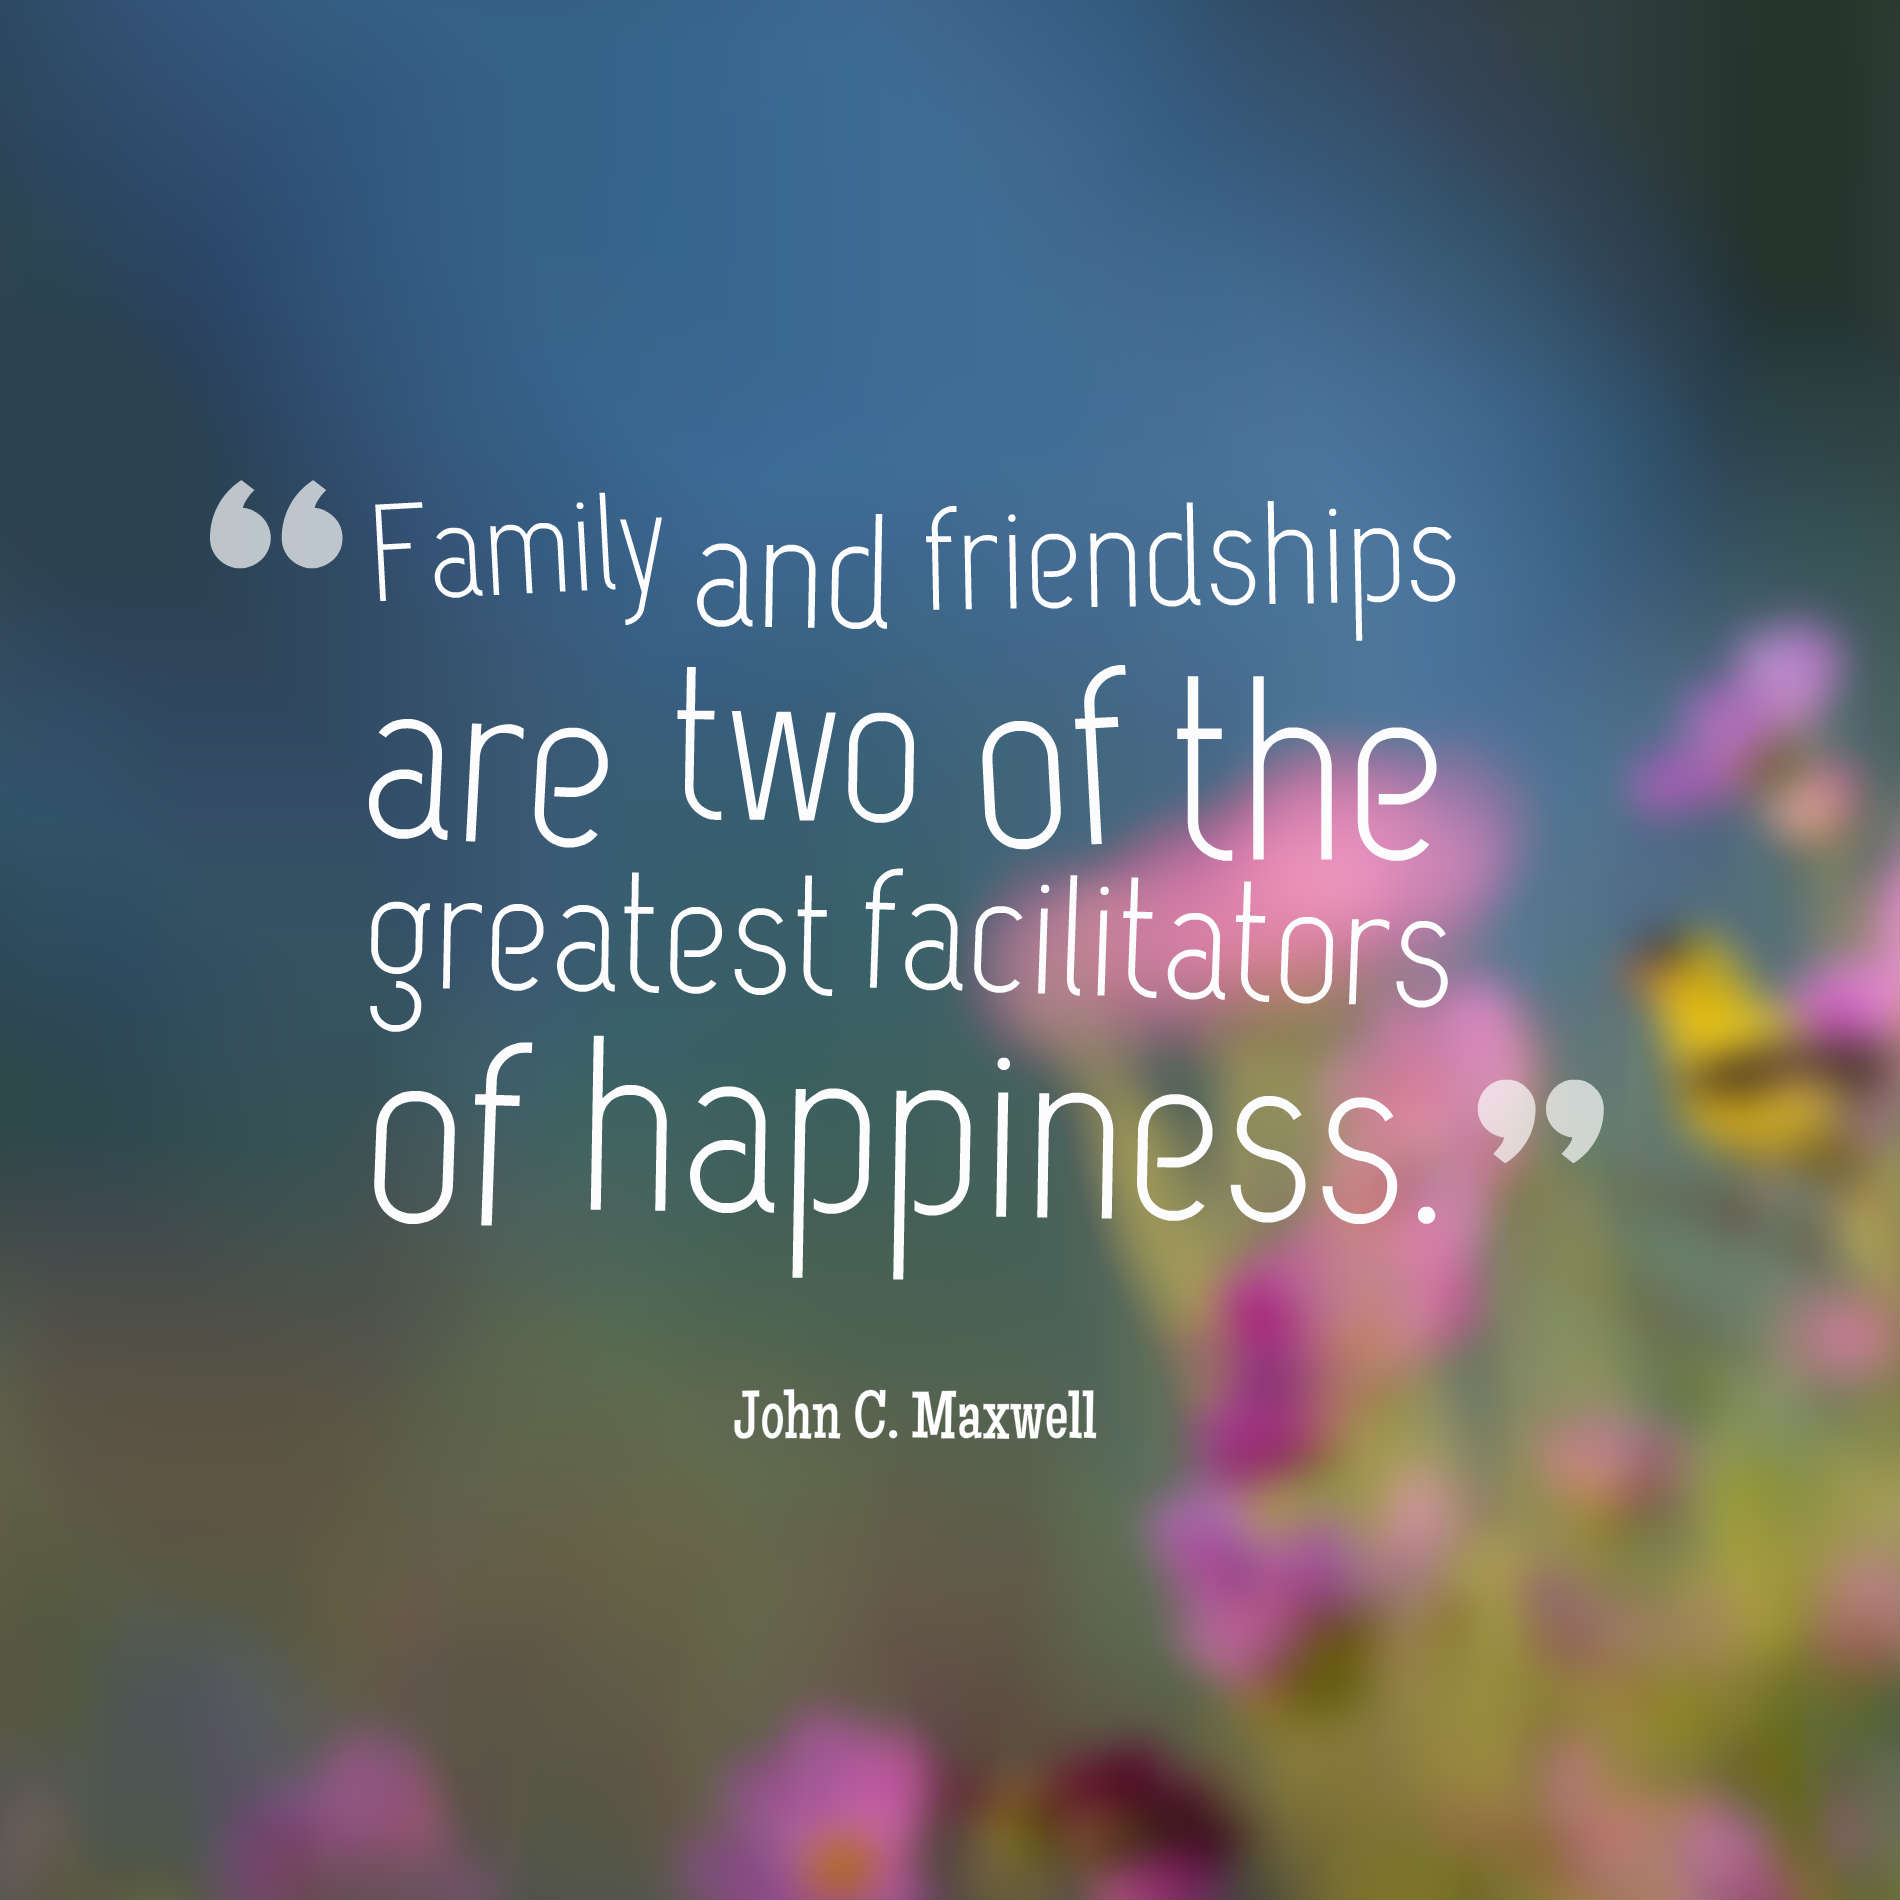 Family and friendships are two of the greatest facilitators of happiness. John C. Maxwell